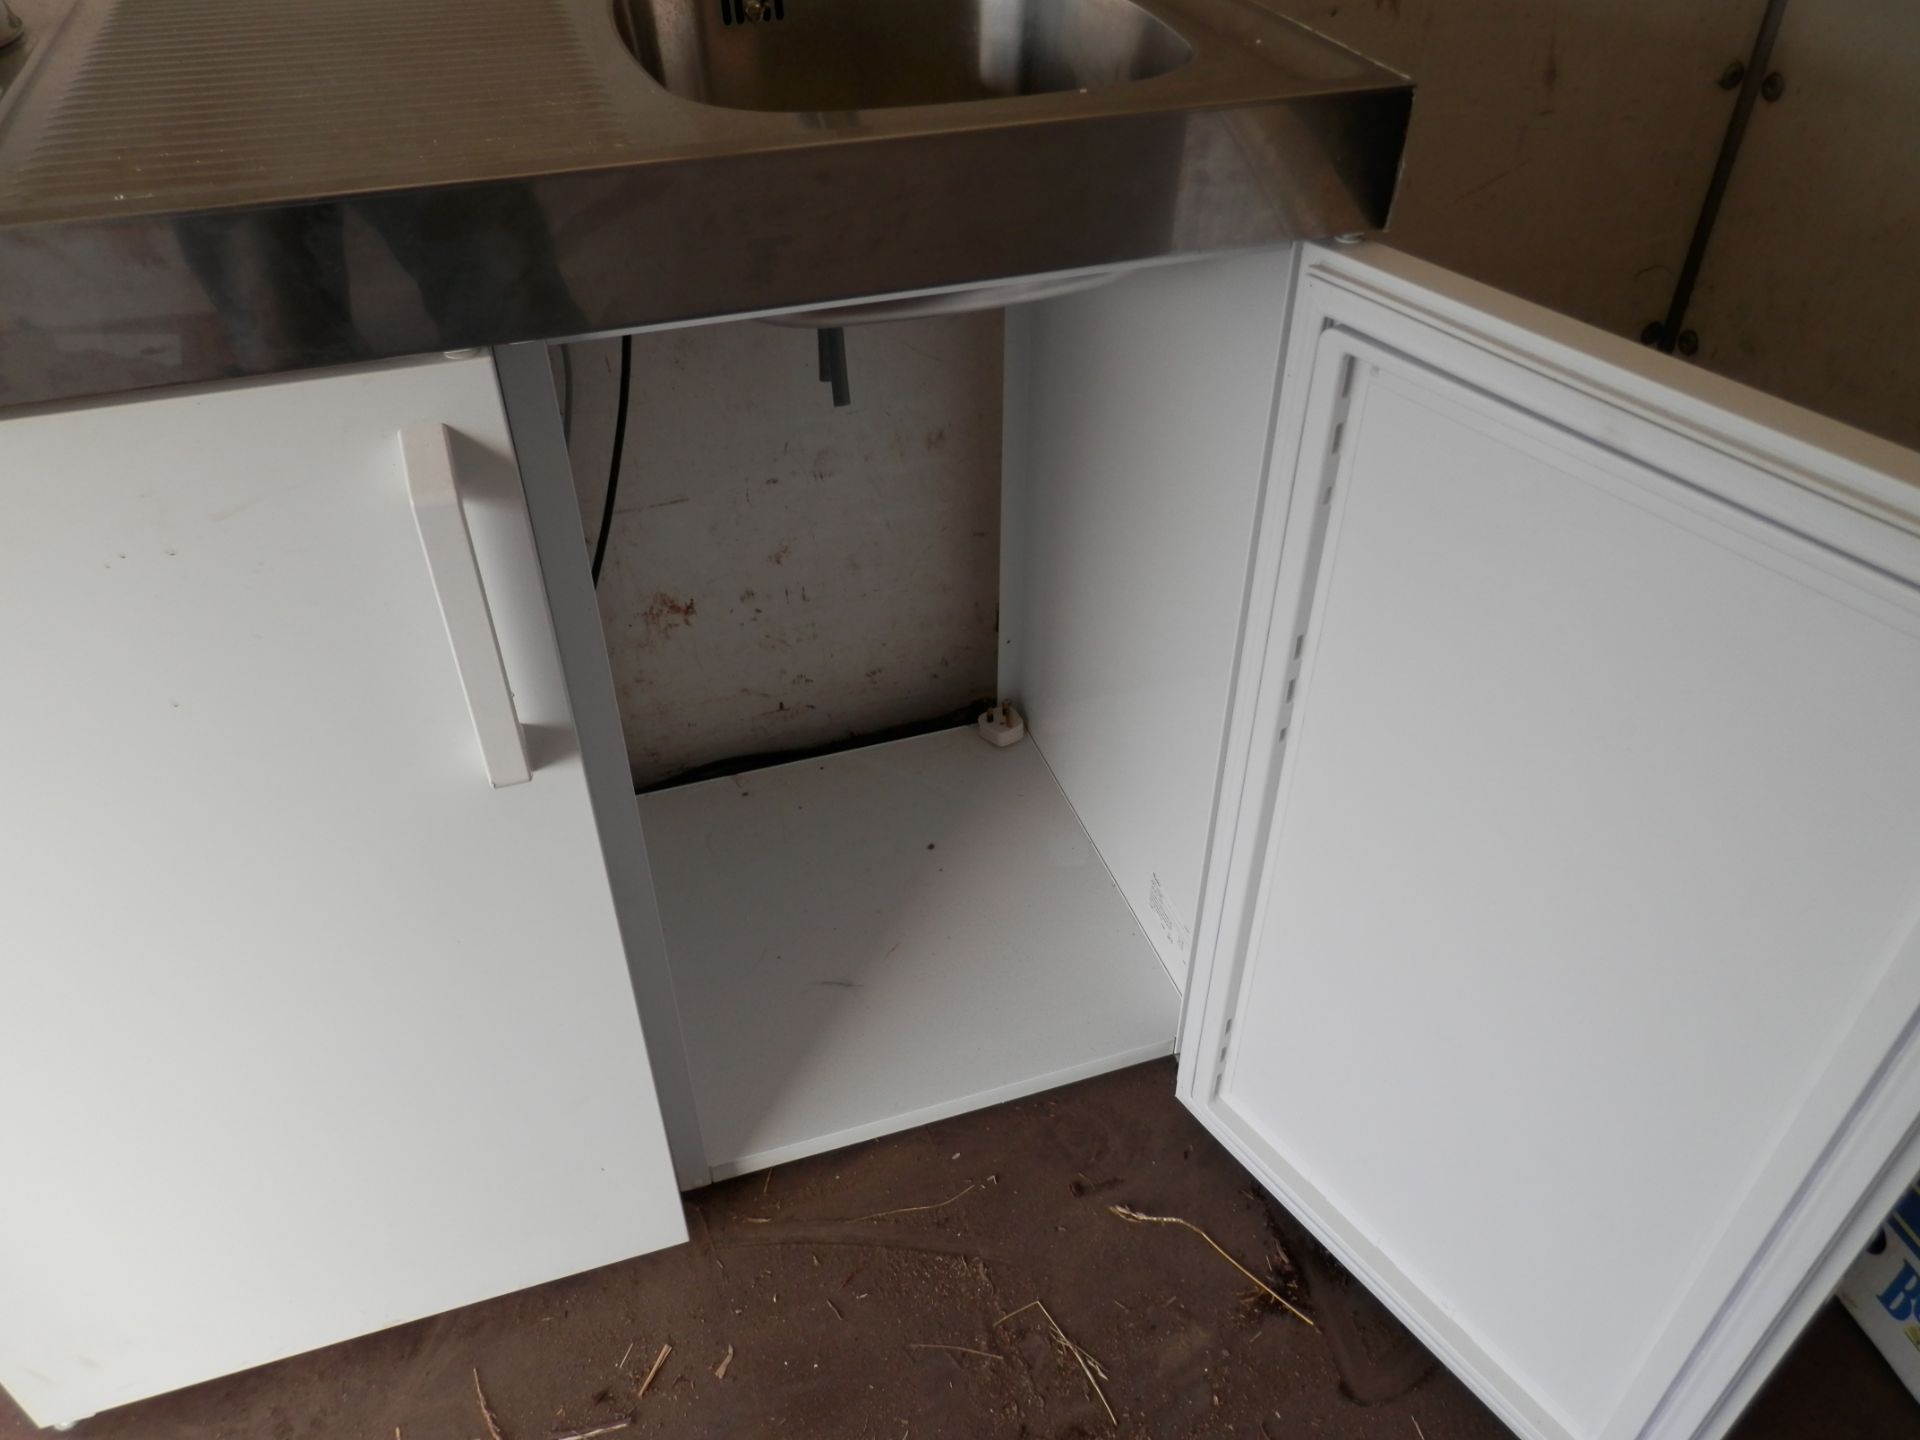 FREE STANDING WHIRLPOOL SINK, 2 HOBS & FRIDGE UNIT, IDEAL FOR MOTORHOME CONVERSION OR OFFICE ETC - Image 5 of 8